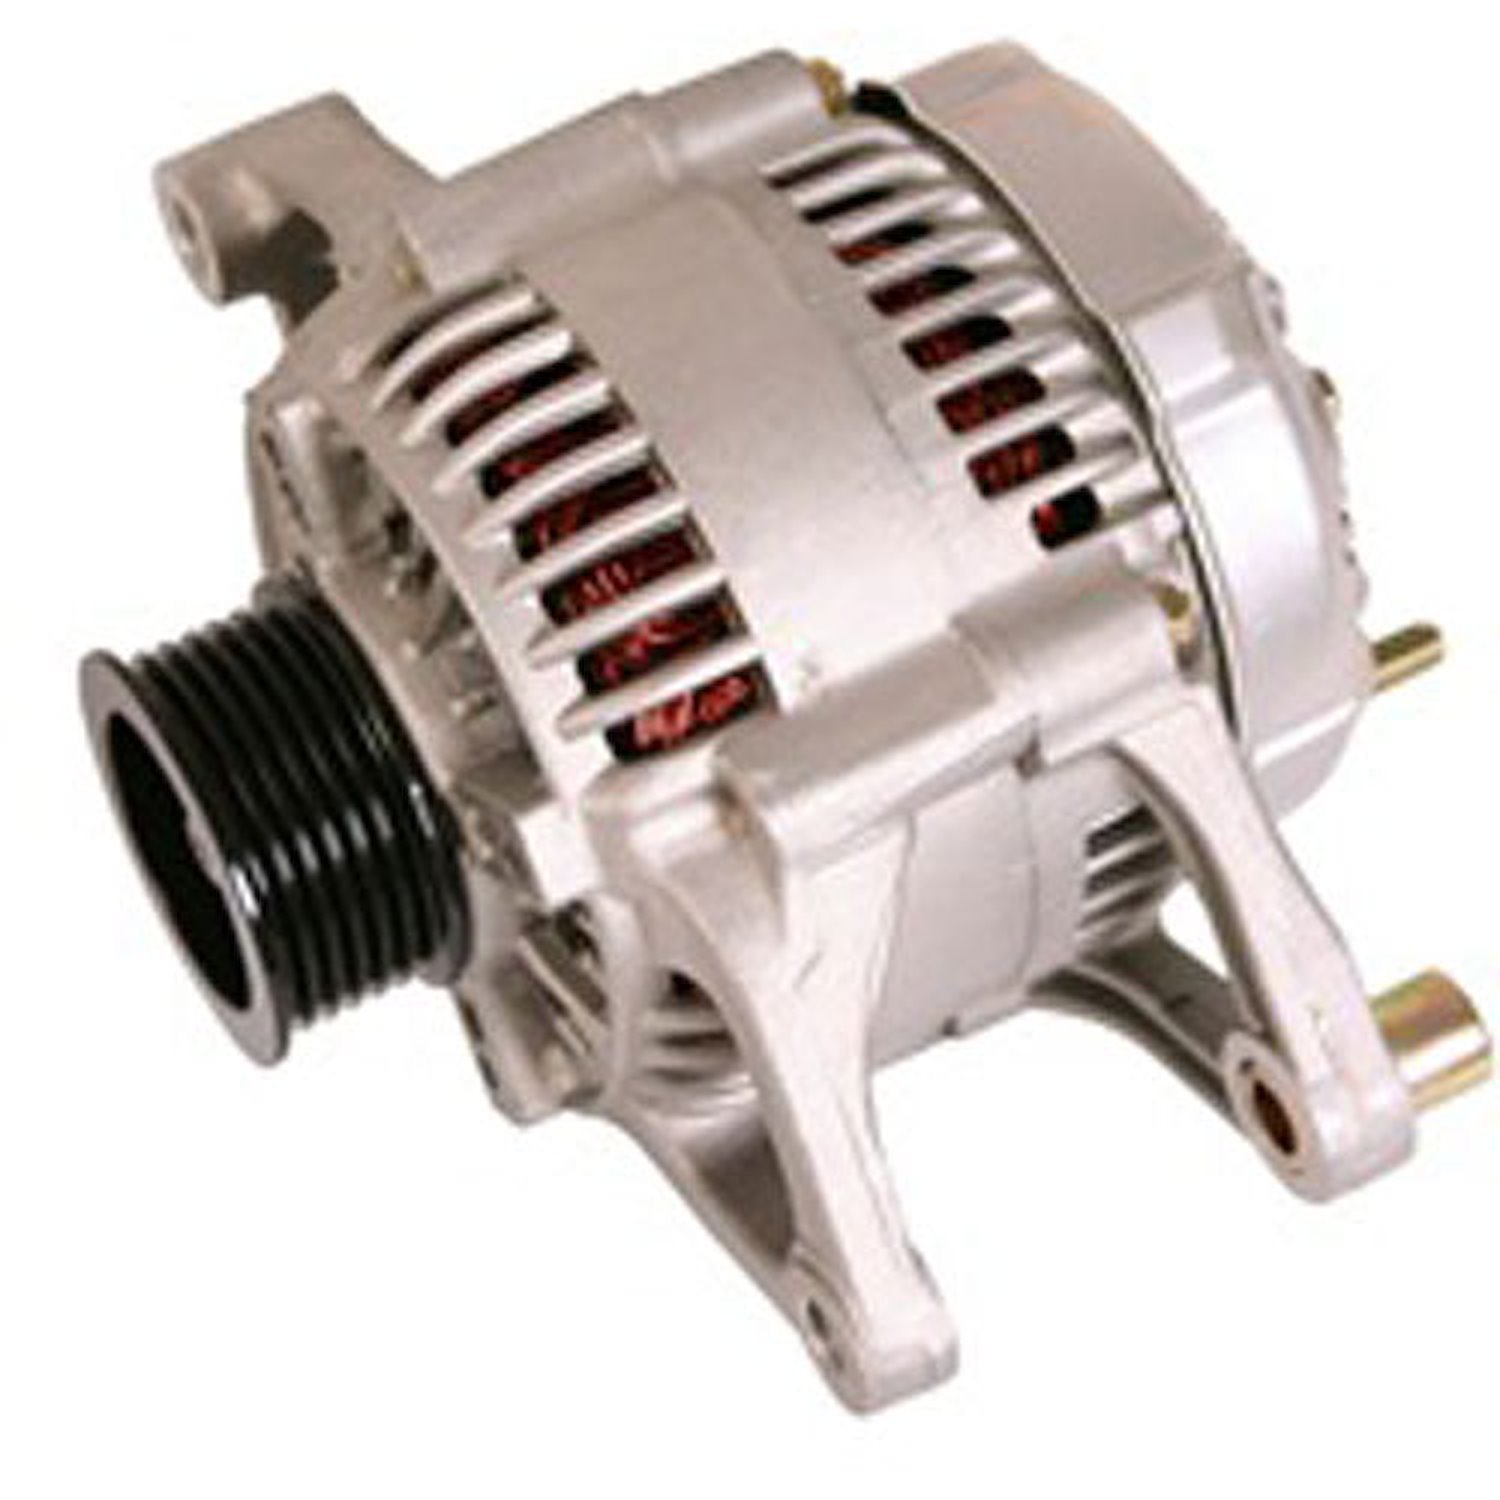 This 120 amp alternator from Omix-ADA fits 91-98 Jeep Cherokees/Wranglers with a 2.5L or 4.0L engine